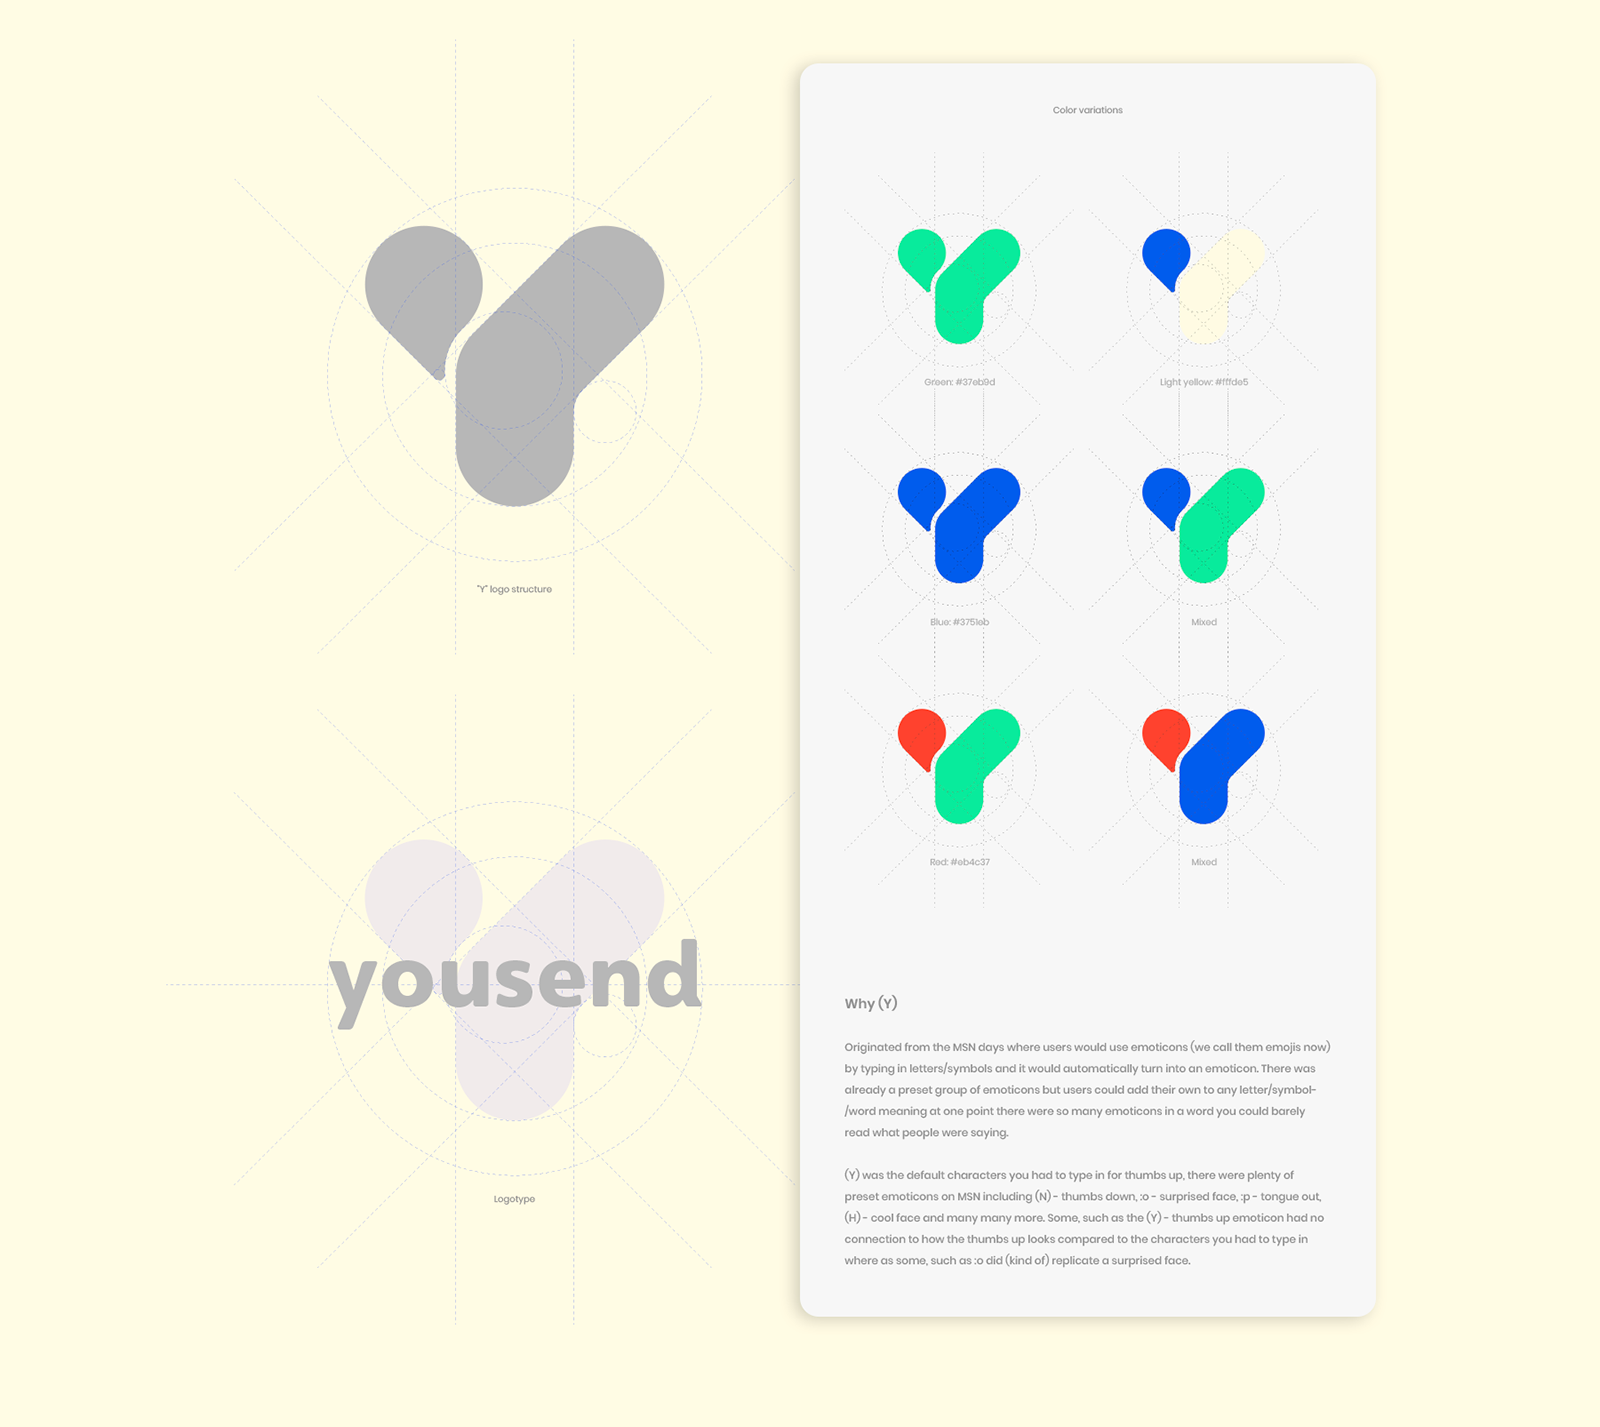 Yousend v1. First complete sketch